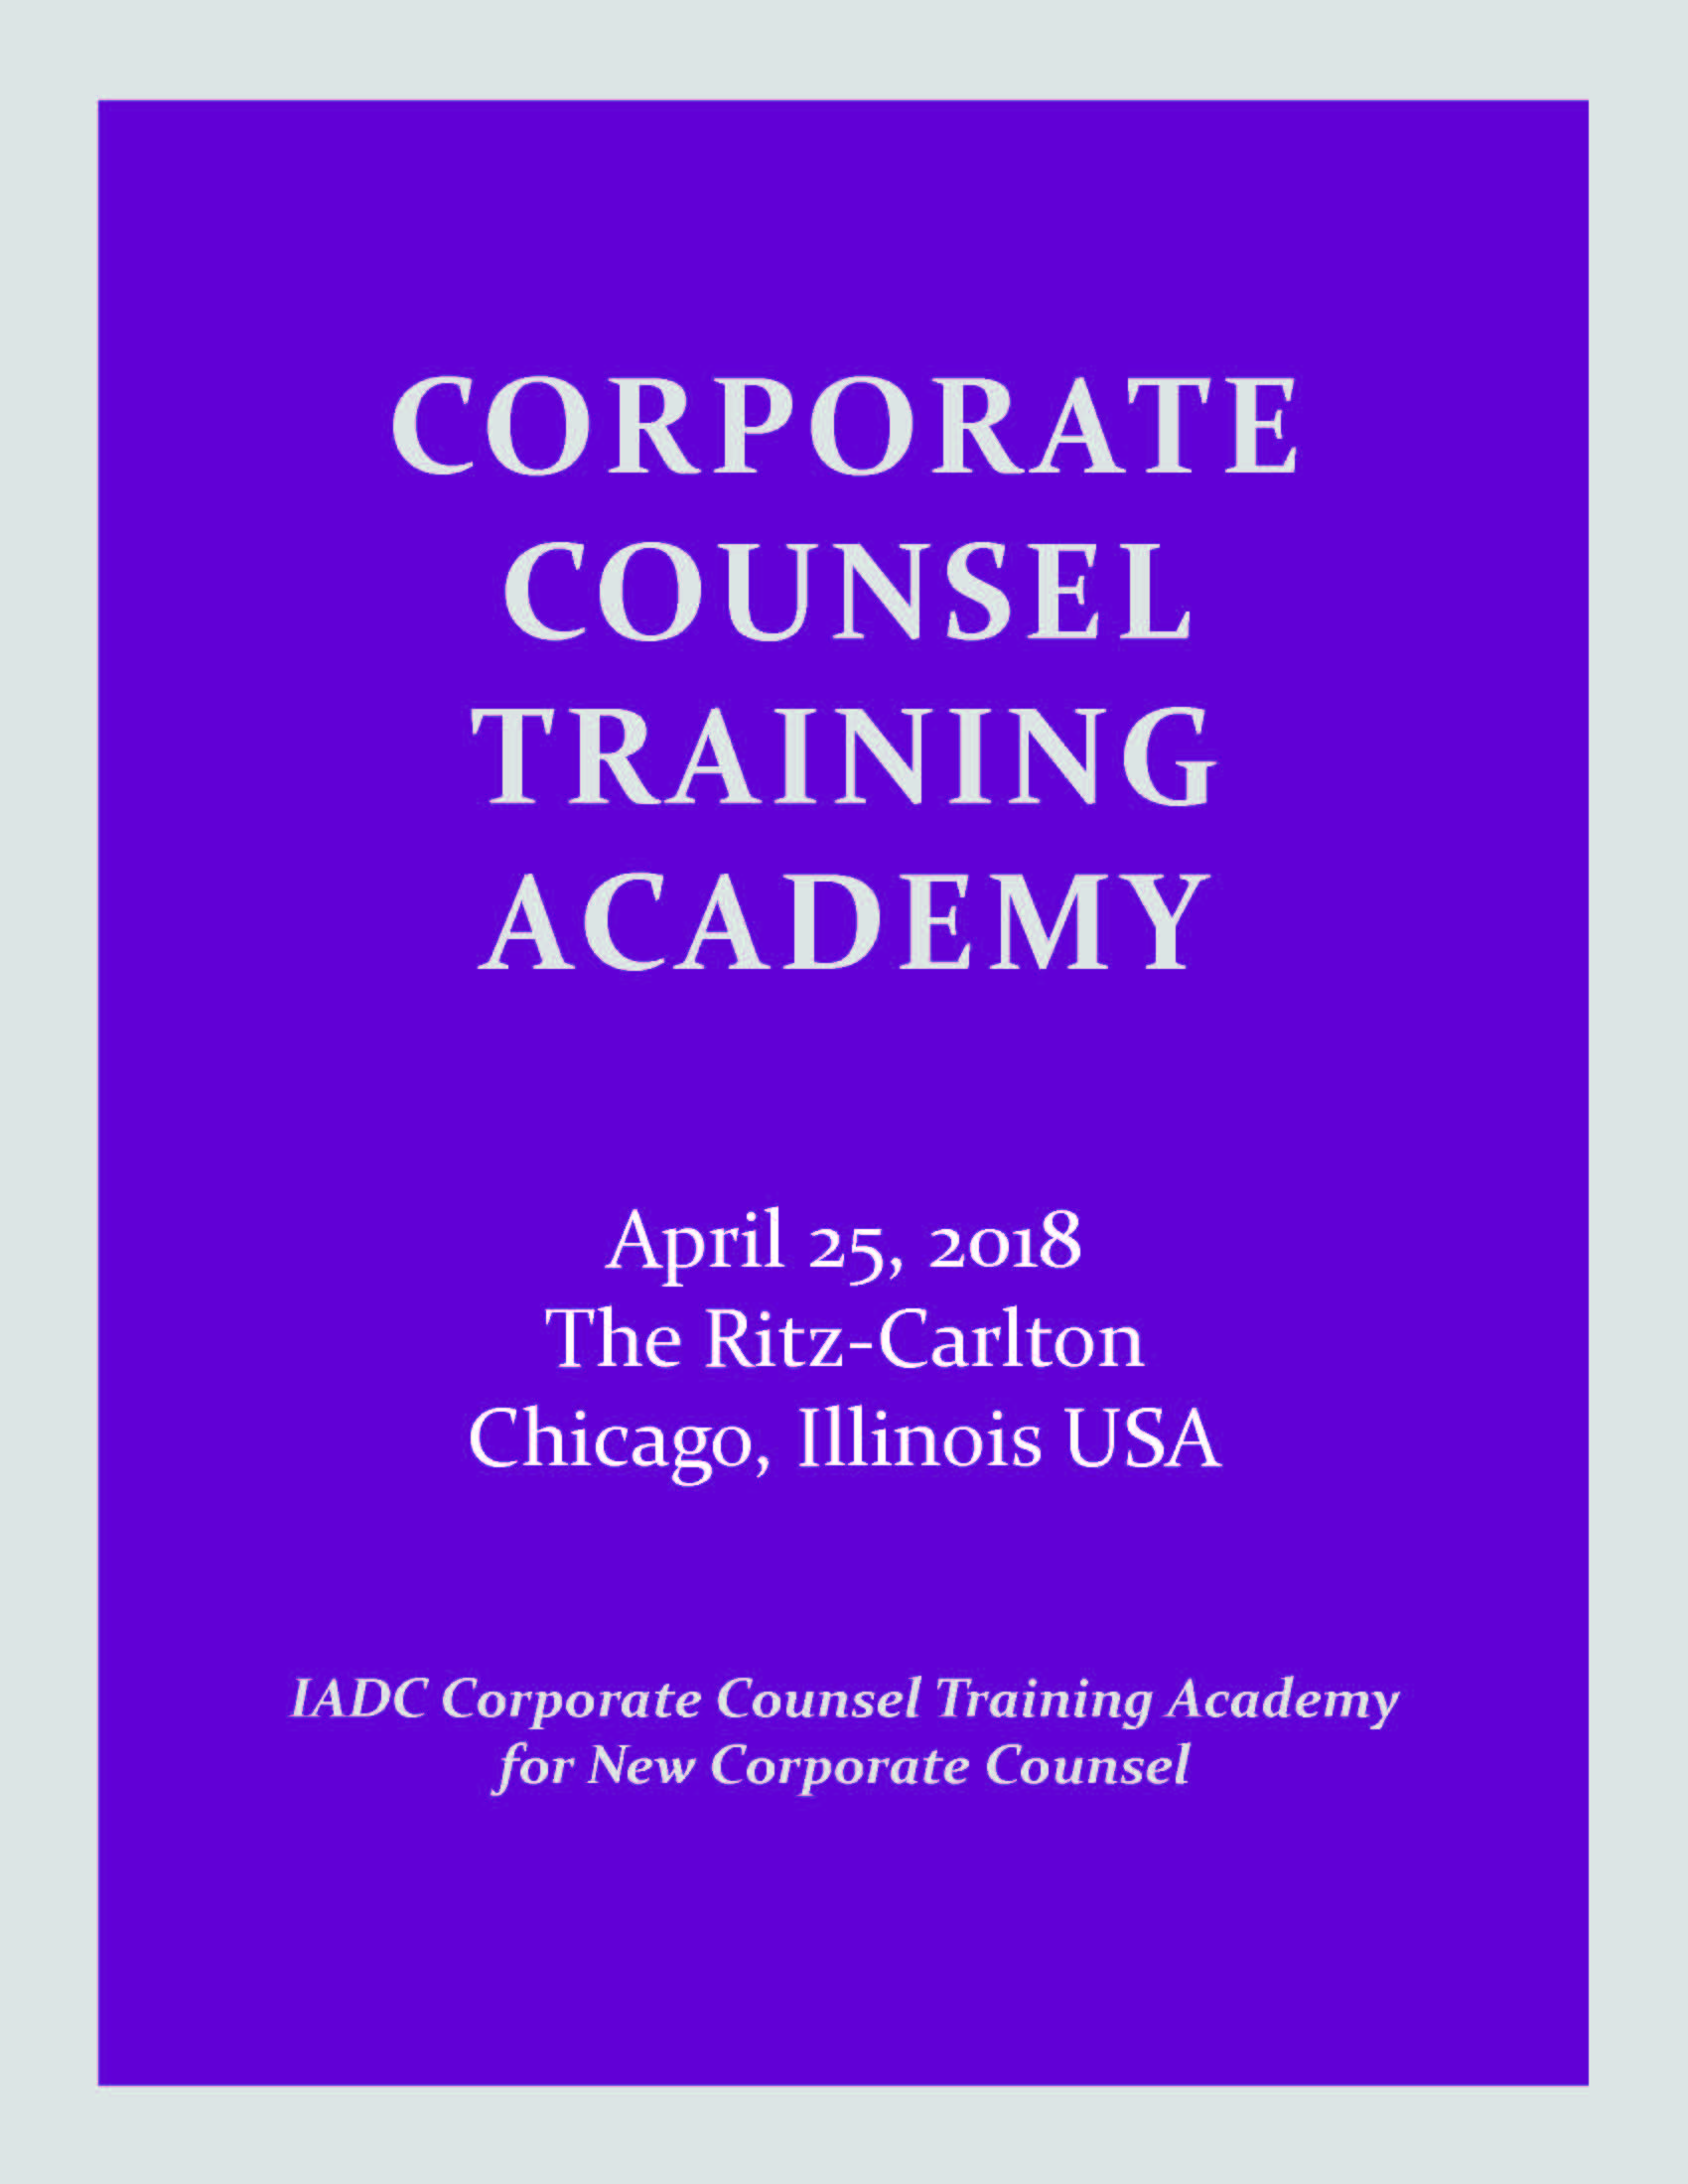 2018 Corporate Counsel Training Academy